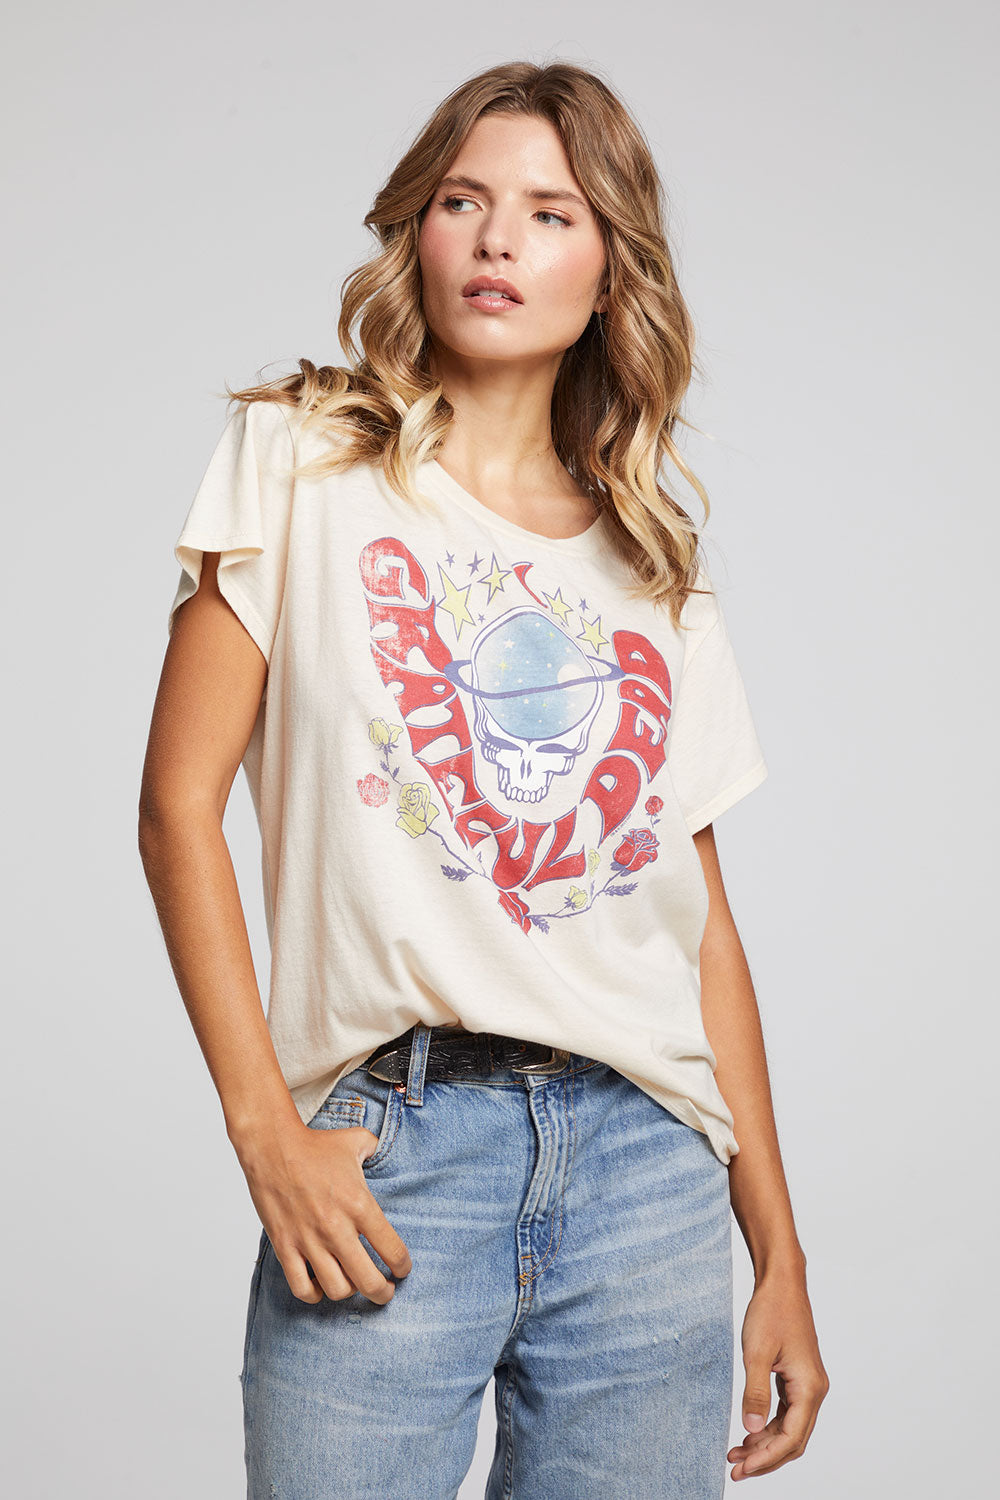 Grateful Dead Space Your Face Tee WOMENS chaserbrand